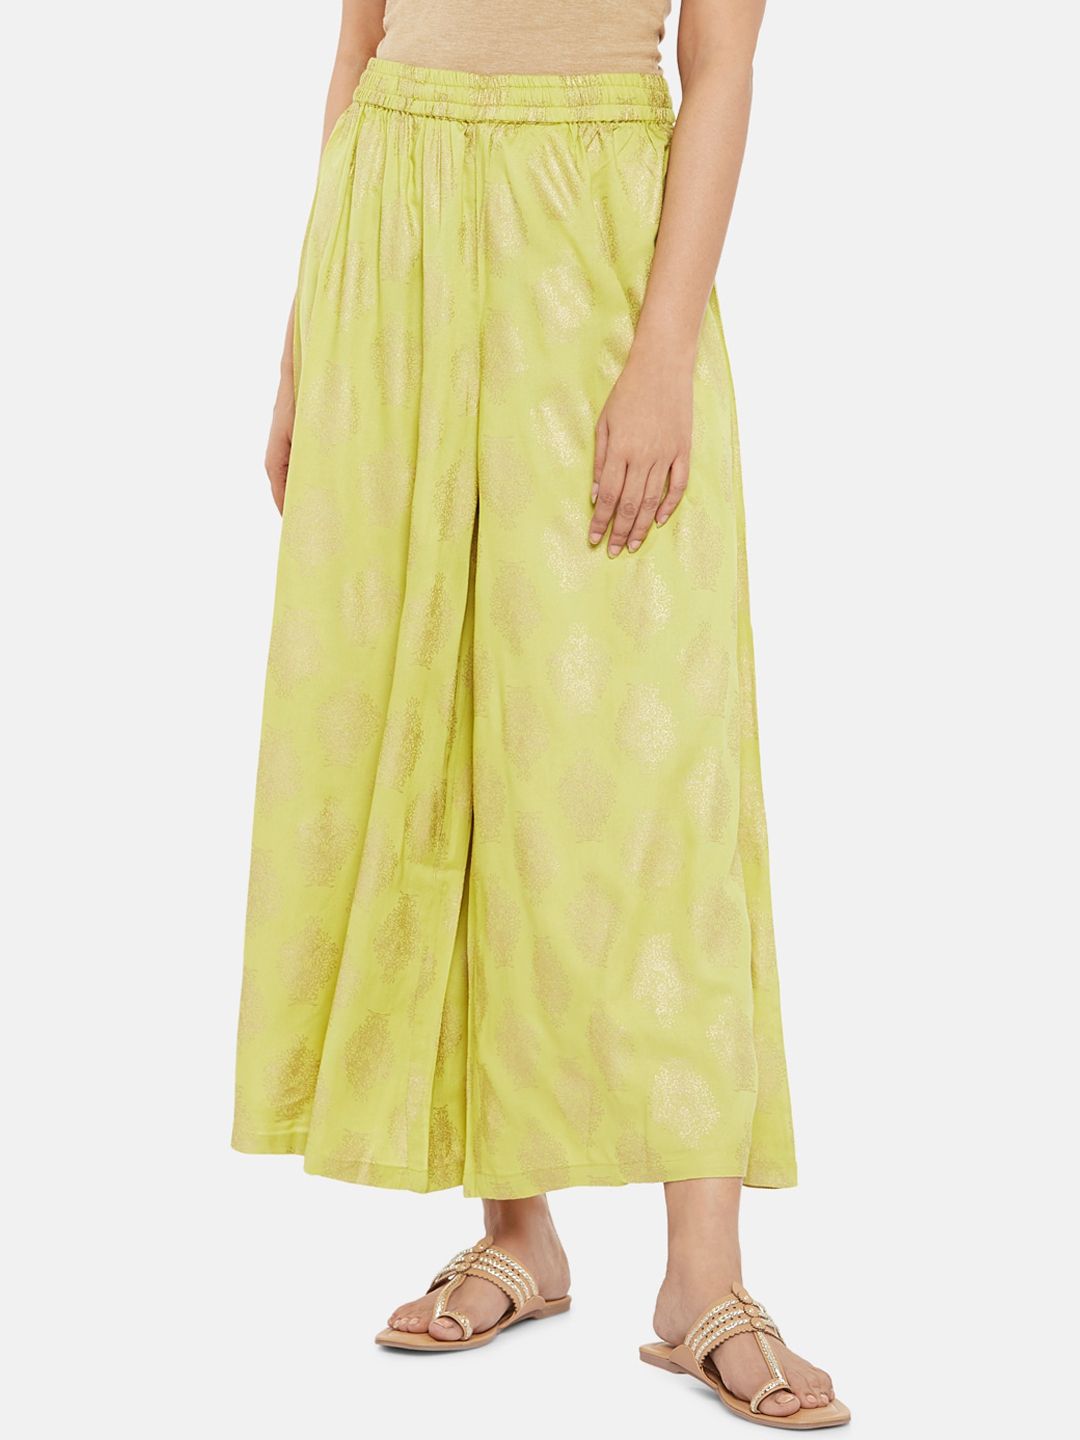 RANGMANCH BY PANTALOONS Women Lime Green Printed Straight Palazzos Price in India